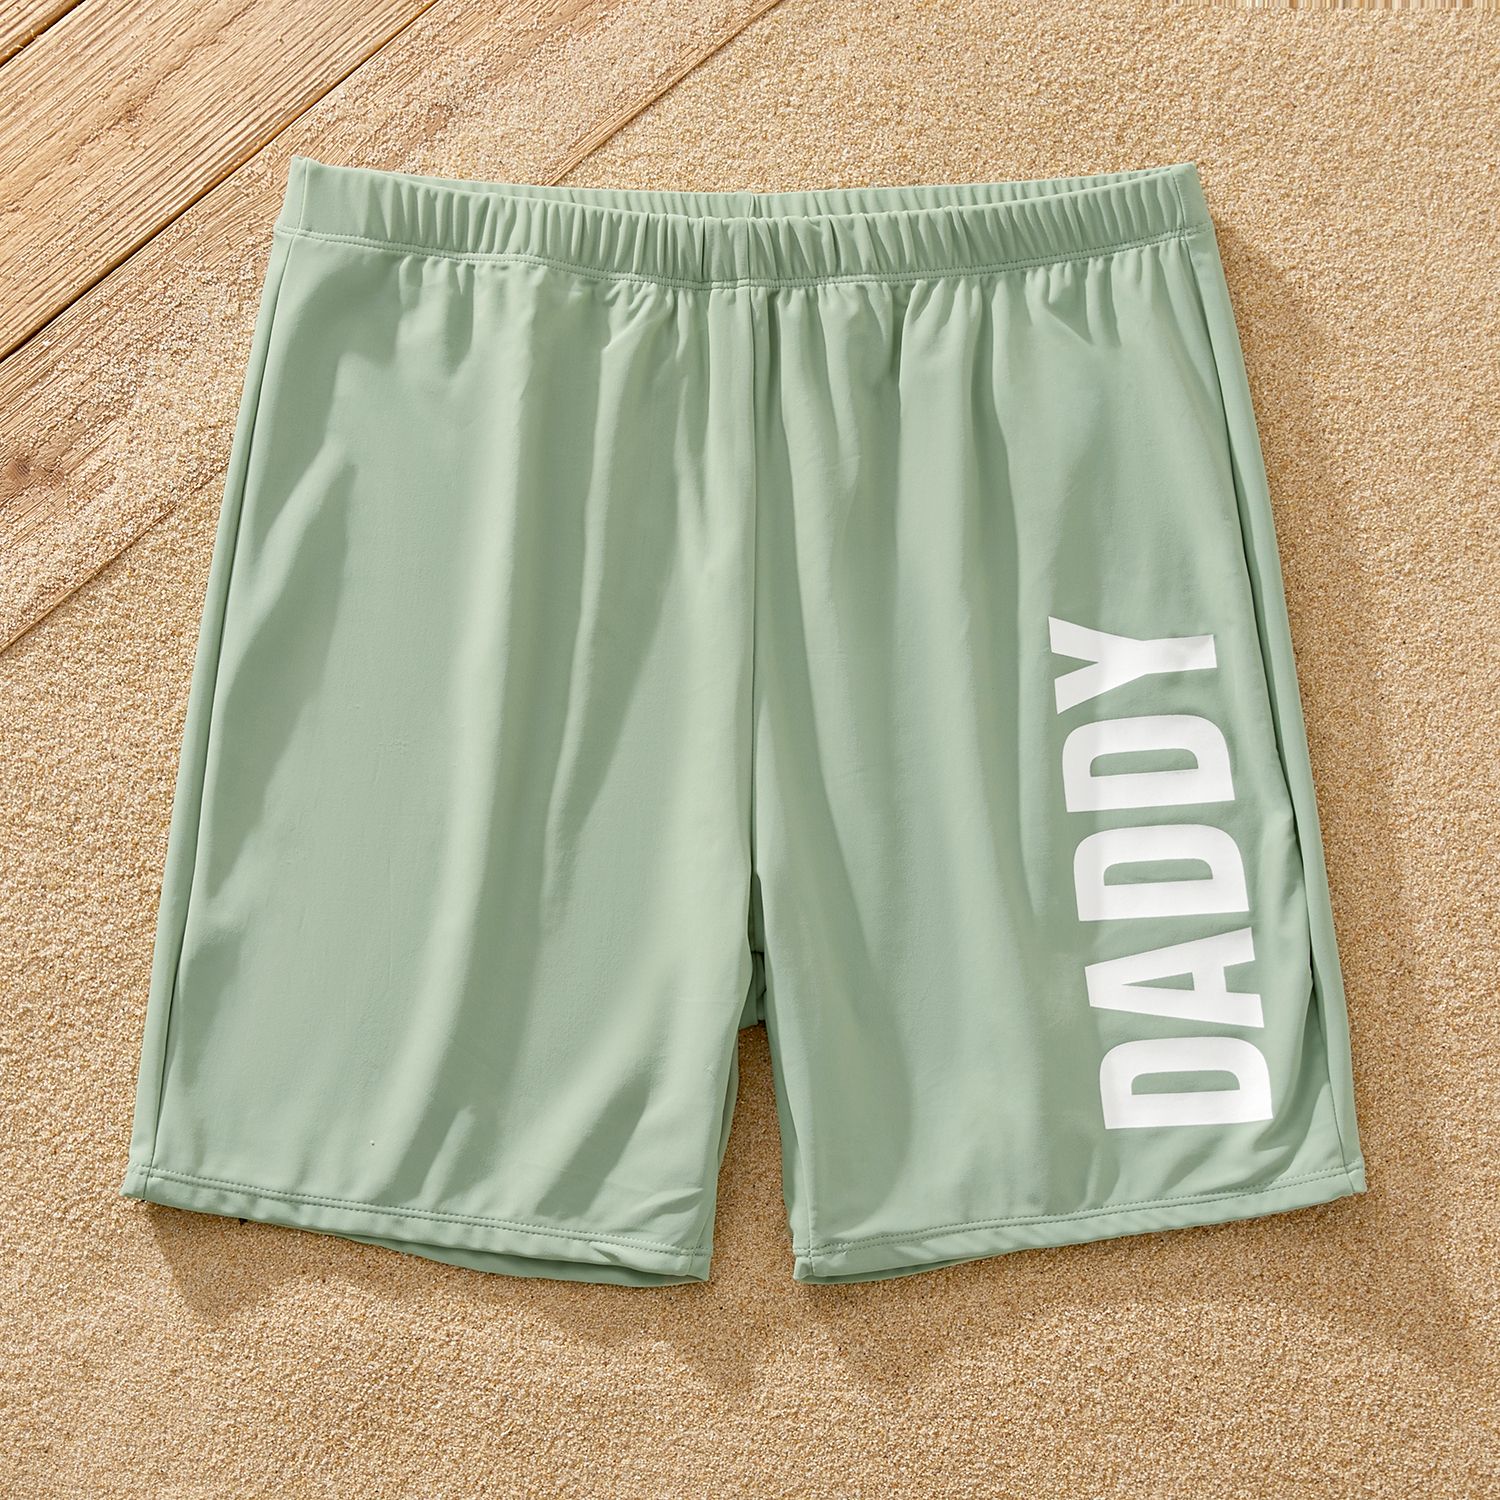 Family Matching Scallop Trim Green One-piece Swimsuit Or Letter Print Swim Trunks Shorts